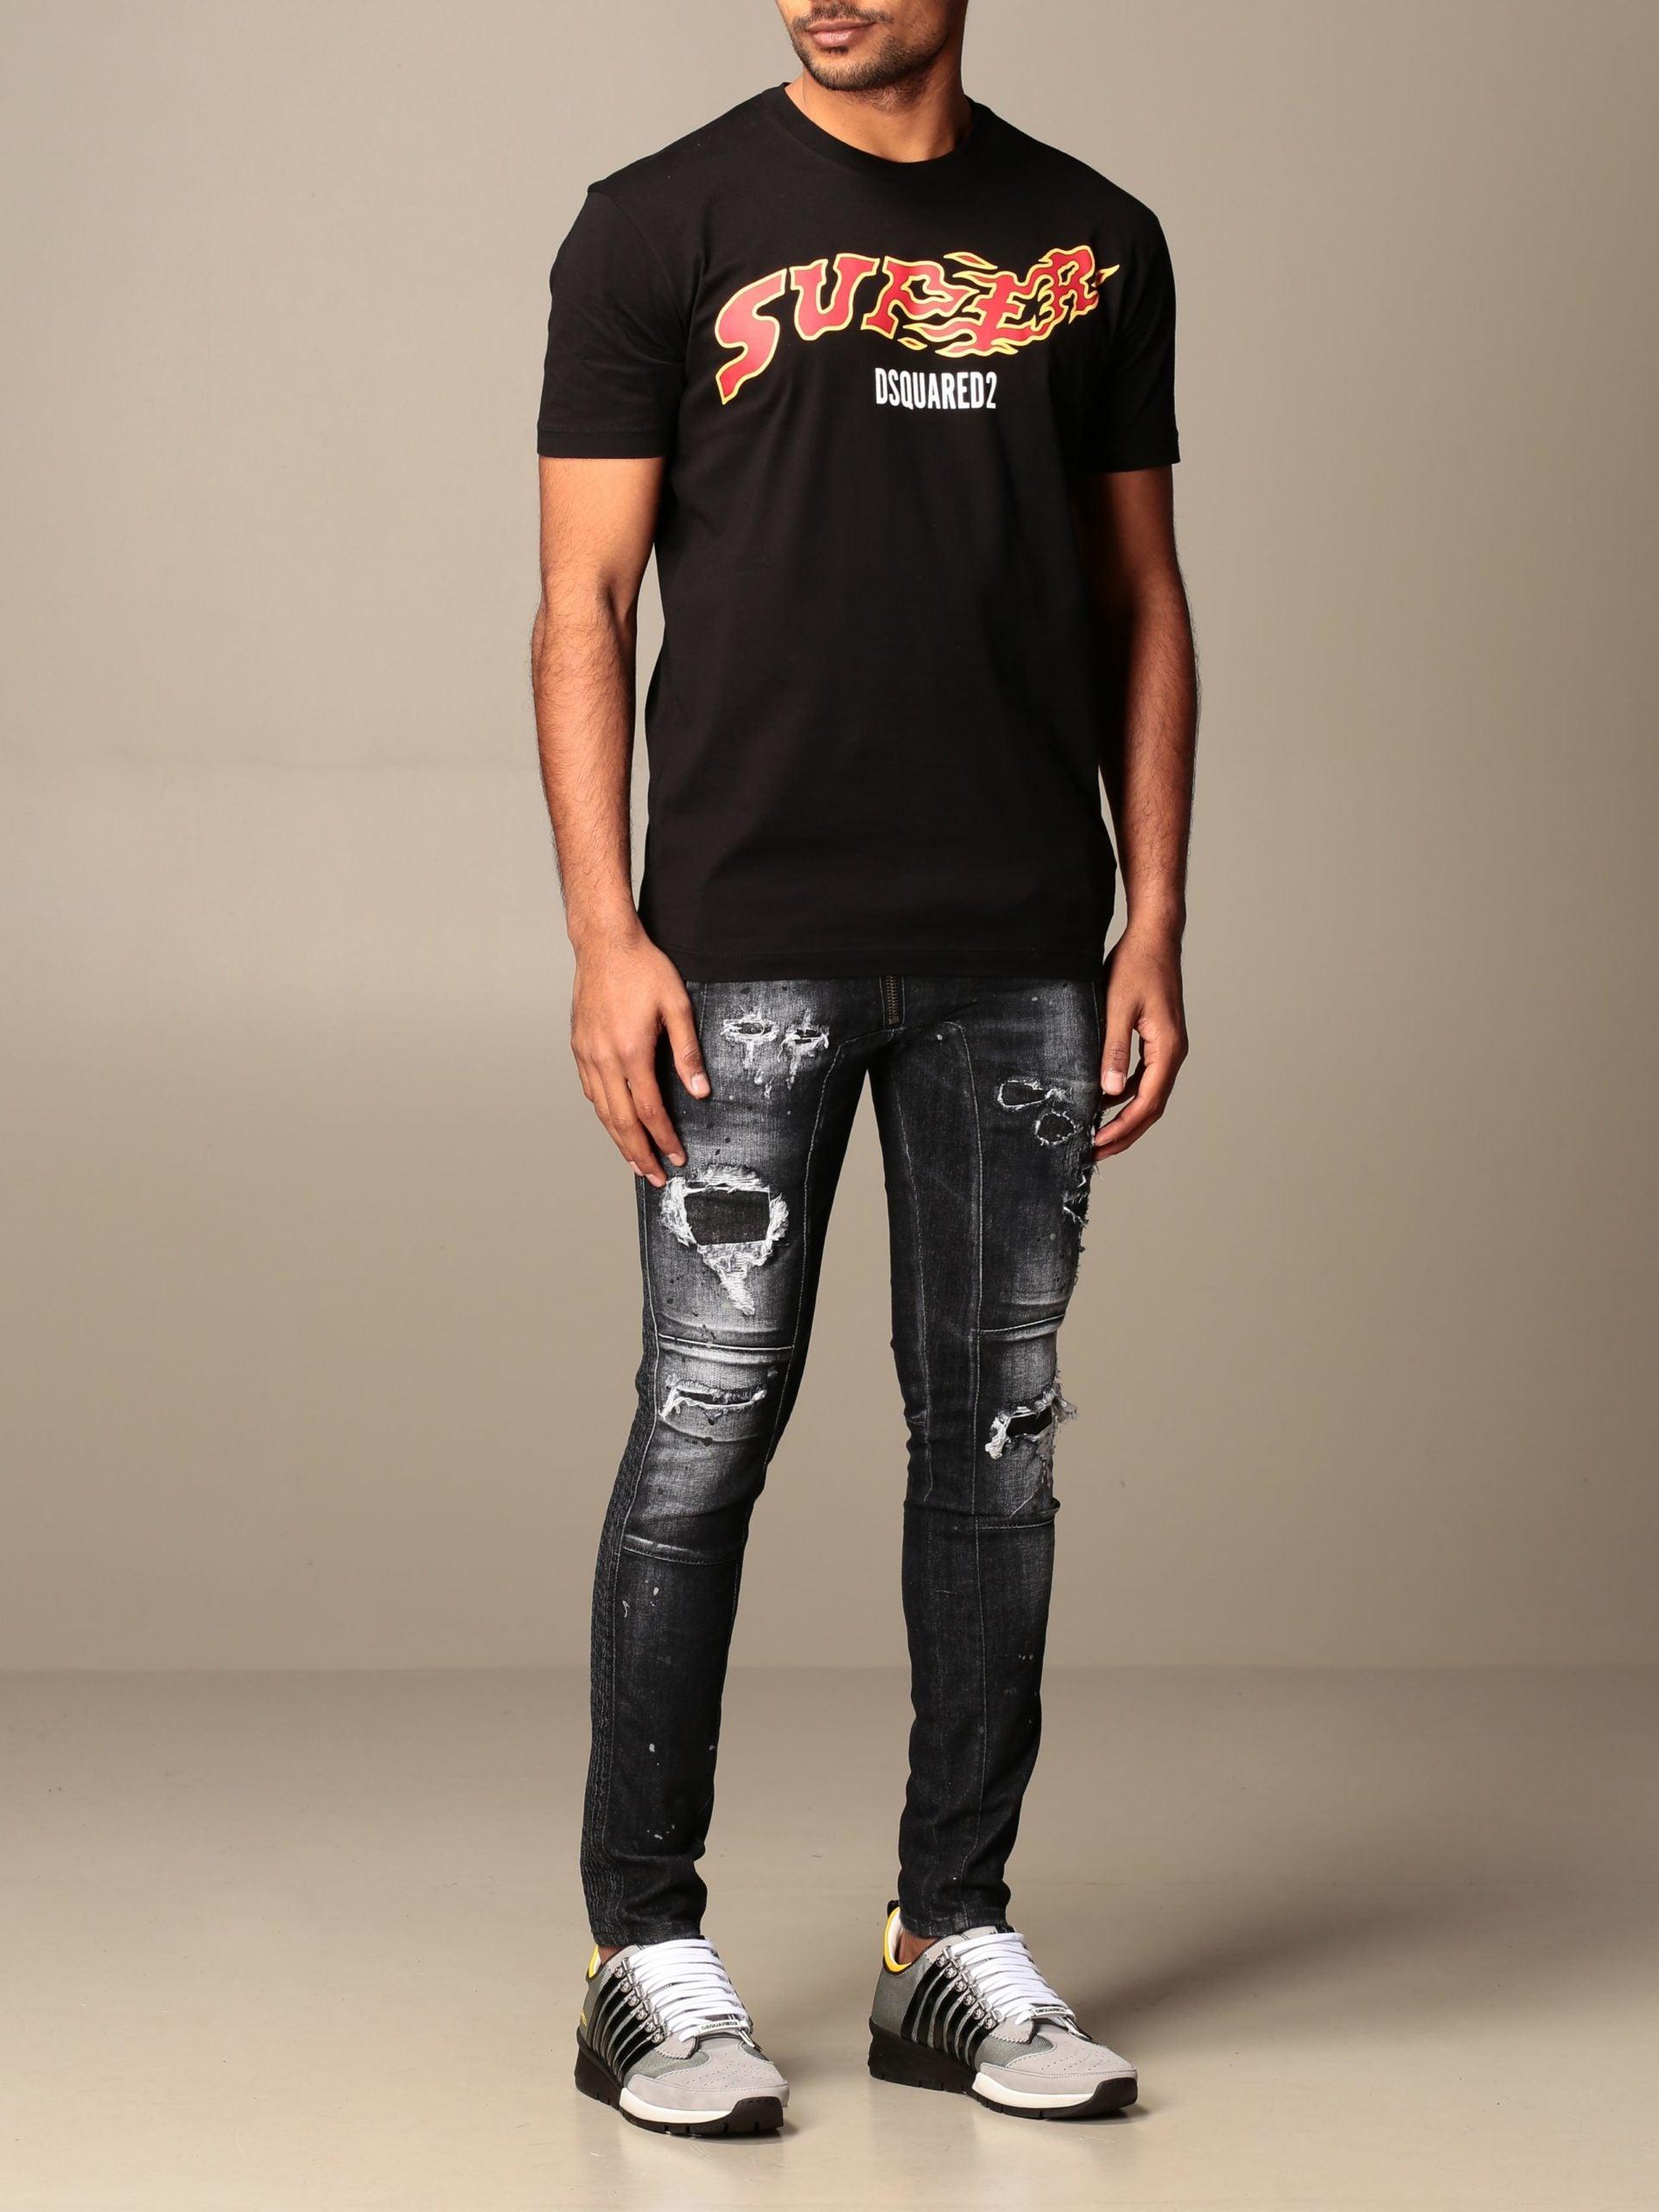 DSquared² Cotton Flame Surfer T-shirt in Black for Men - Save 41% | Lyst